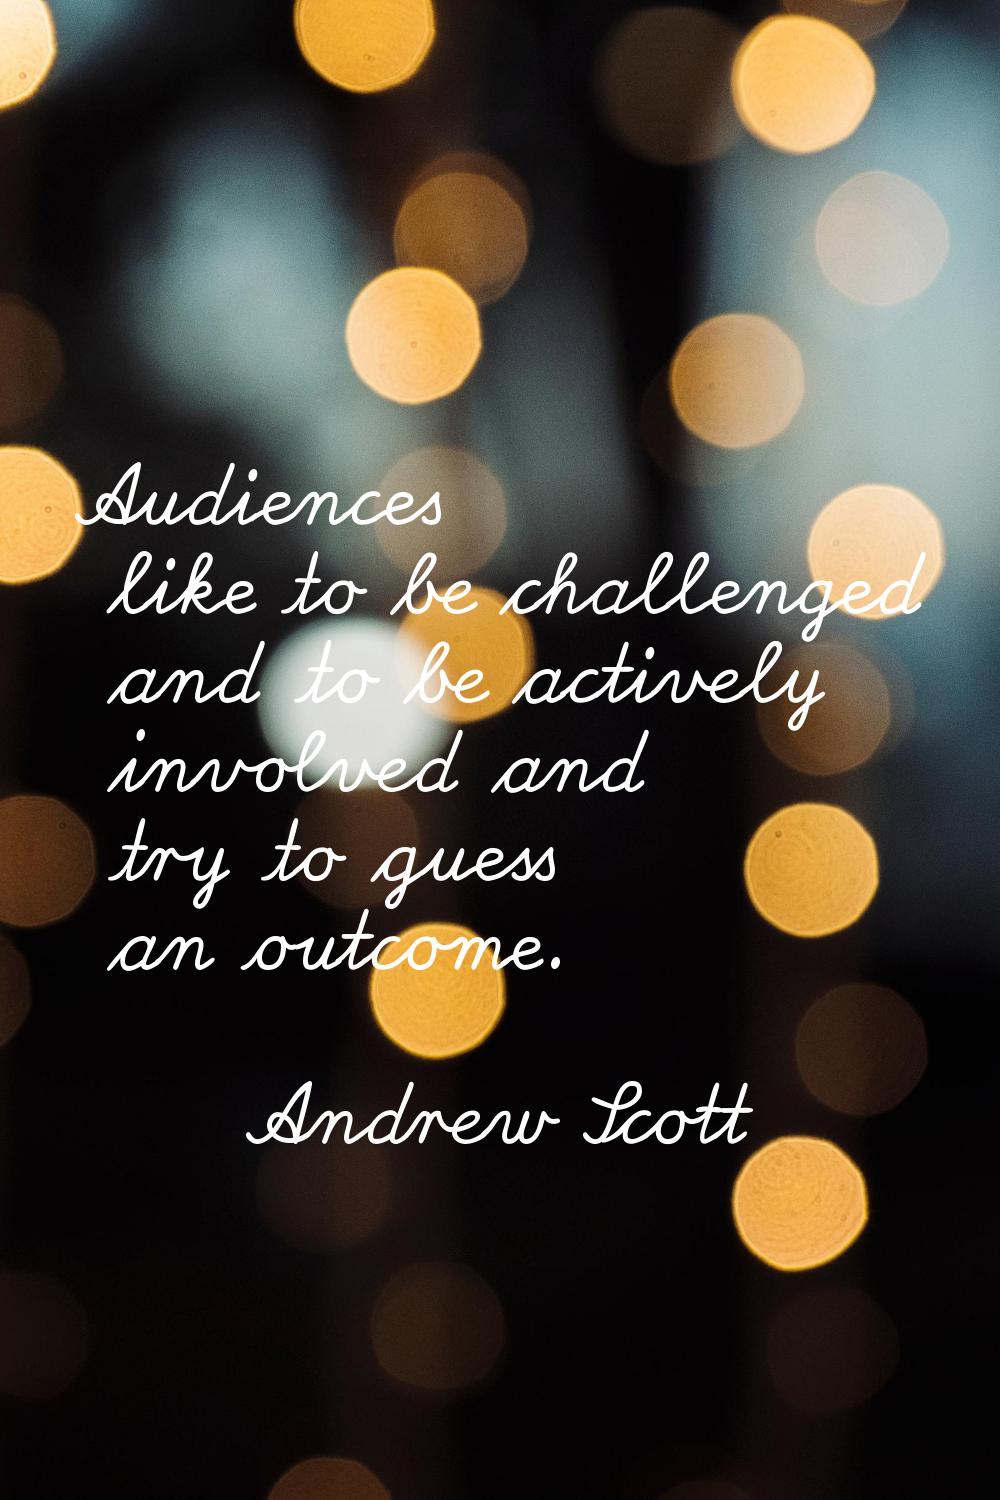 Audiences like to be challenged and to be actively involved and try to guess an outcome.